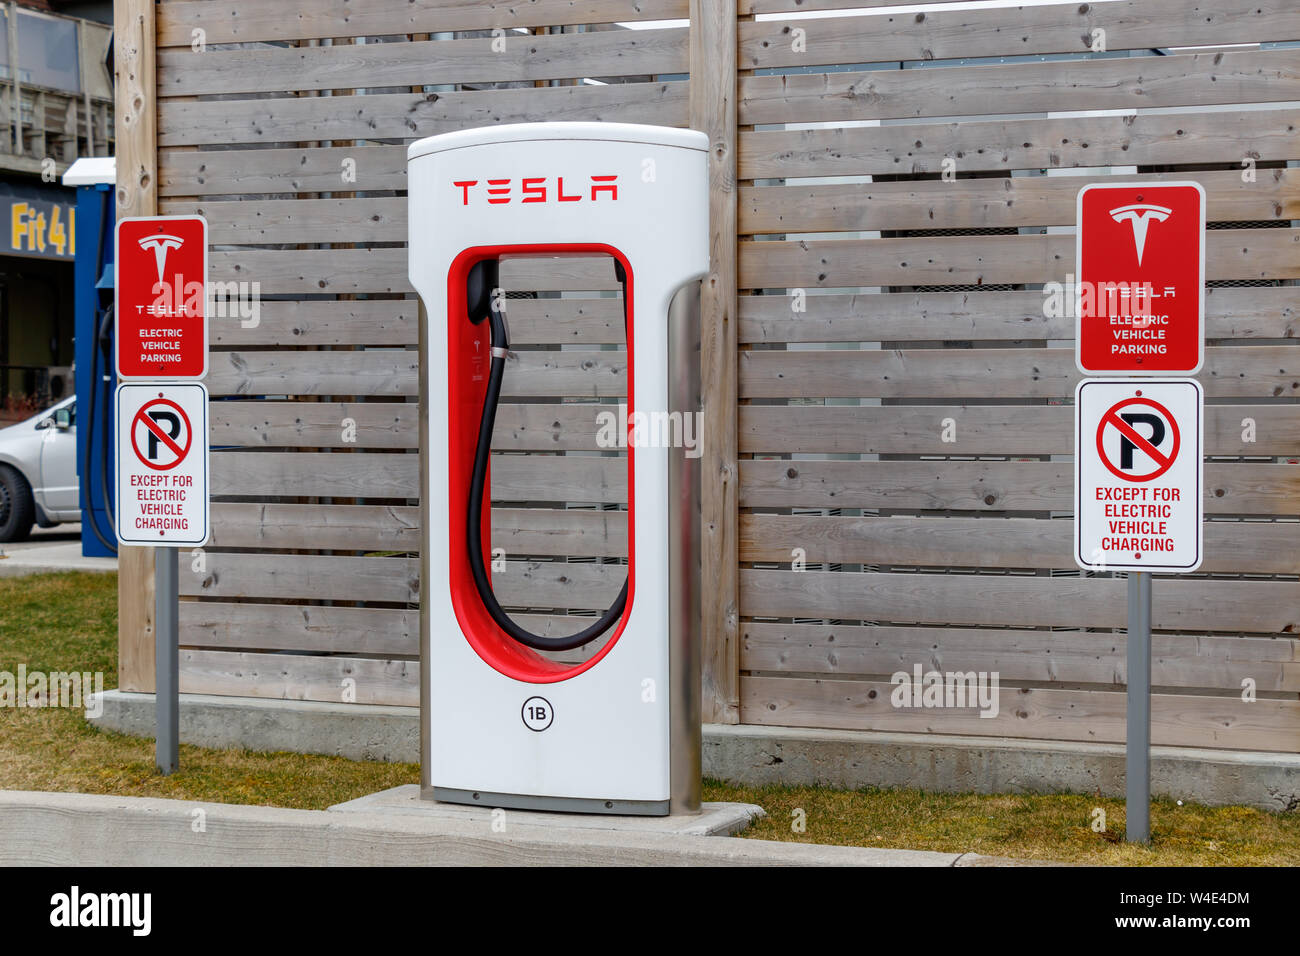 Tesla Supercharger Stall with information/restrictions signs beside. Stock Photo